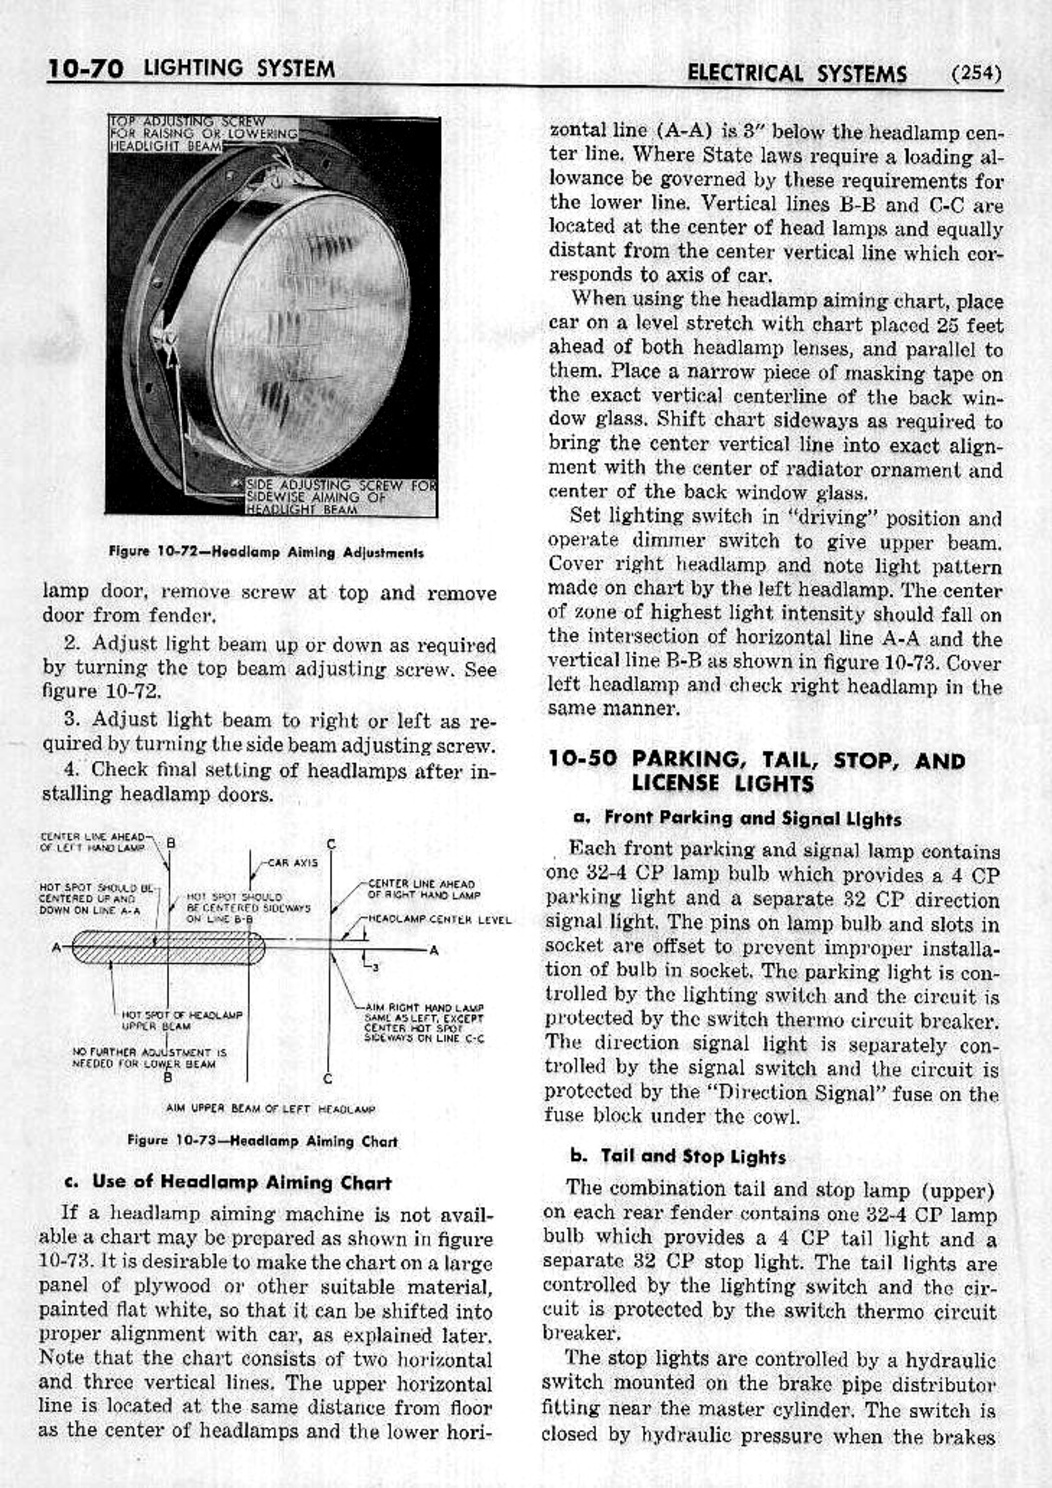 n_11 1953 Buick Shop Manual - Electrical Systems-071-071.jpg